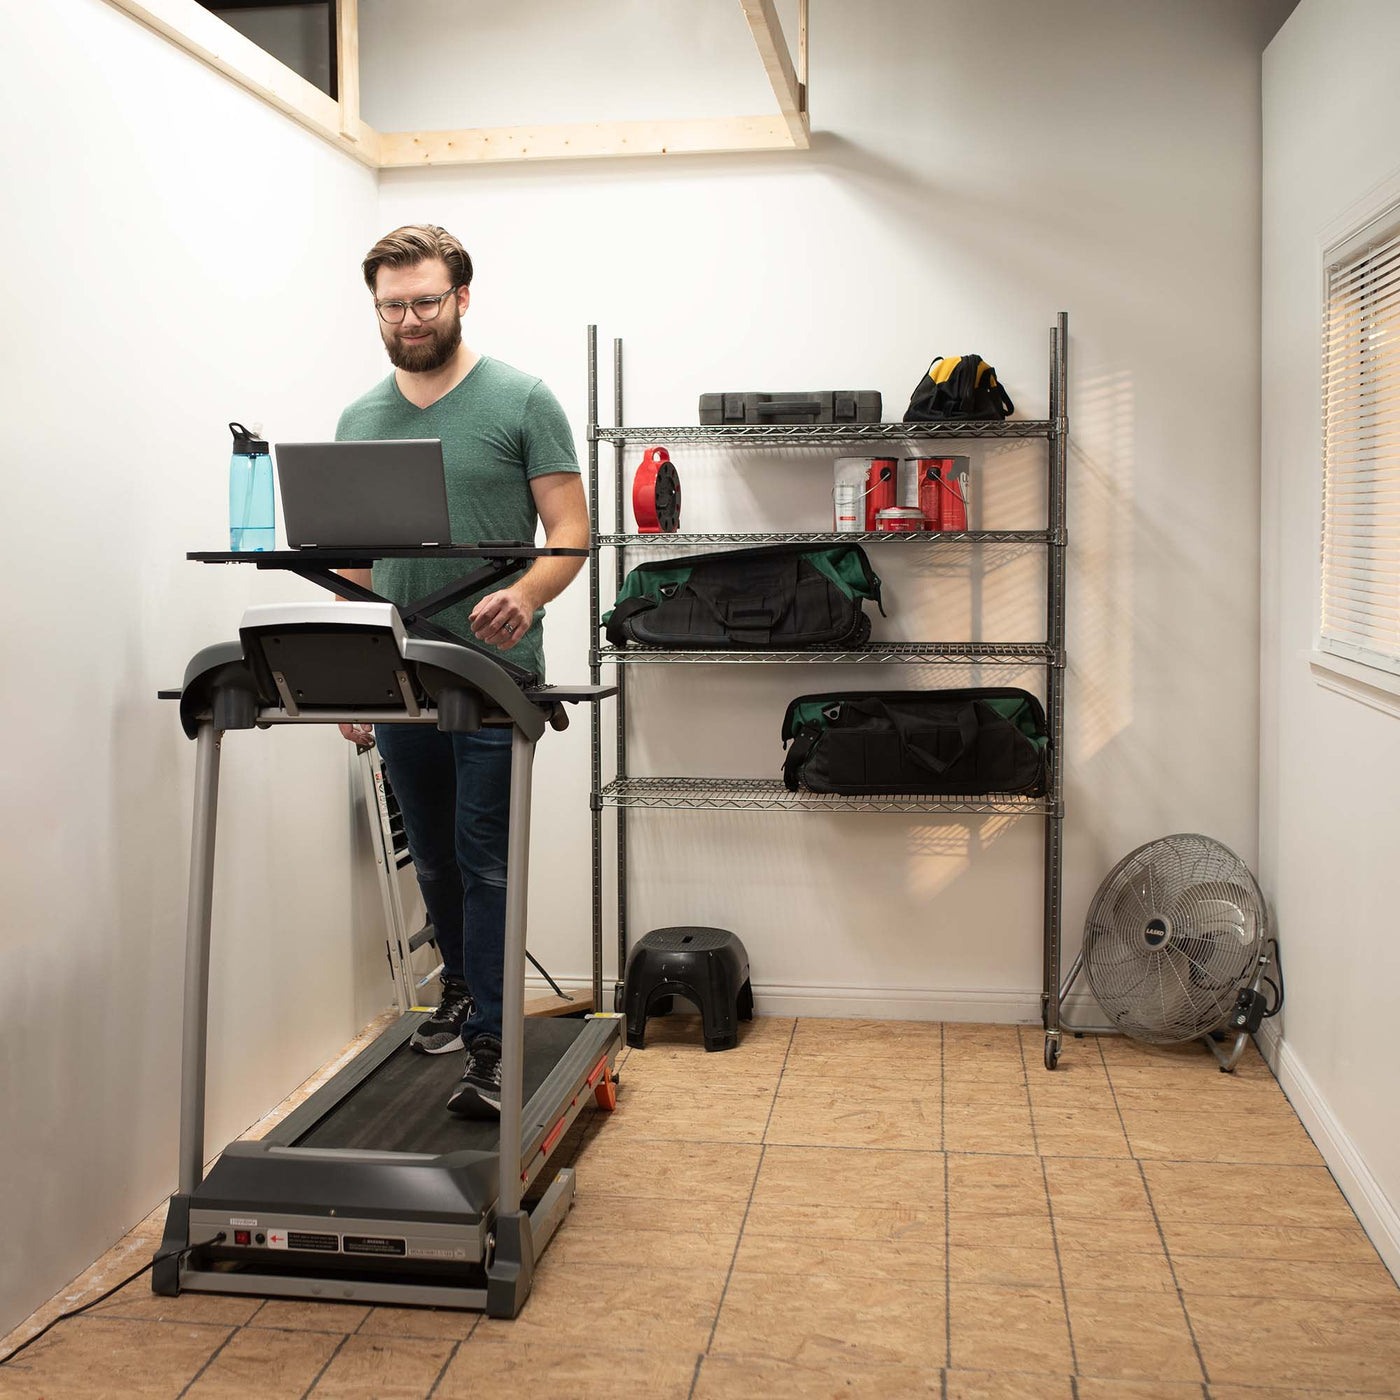 A man walking on a treadmill while working from his laptop.